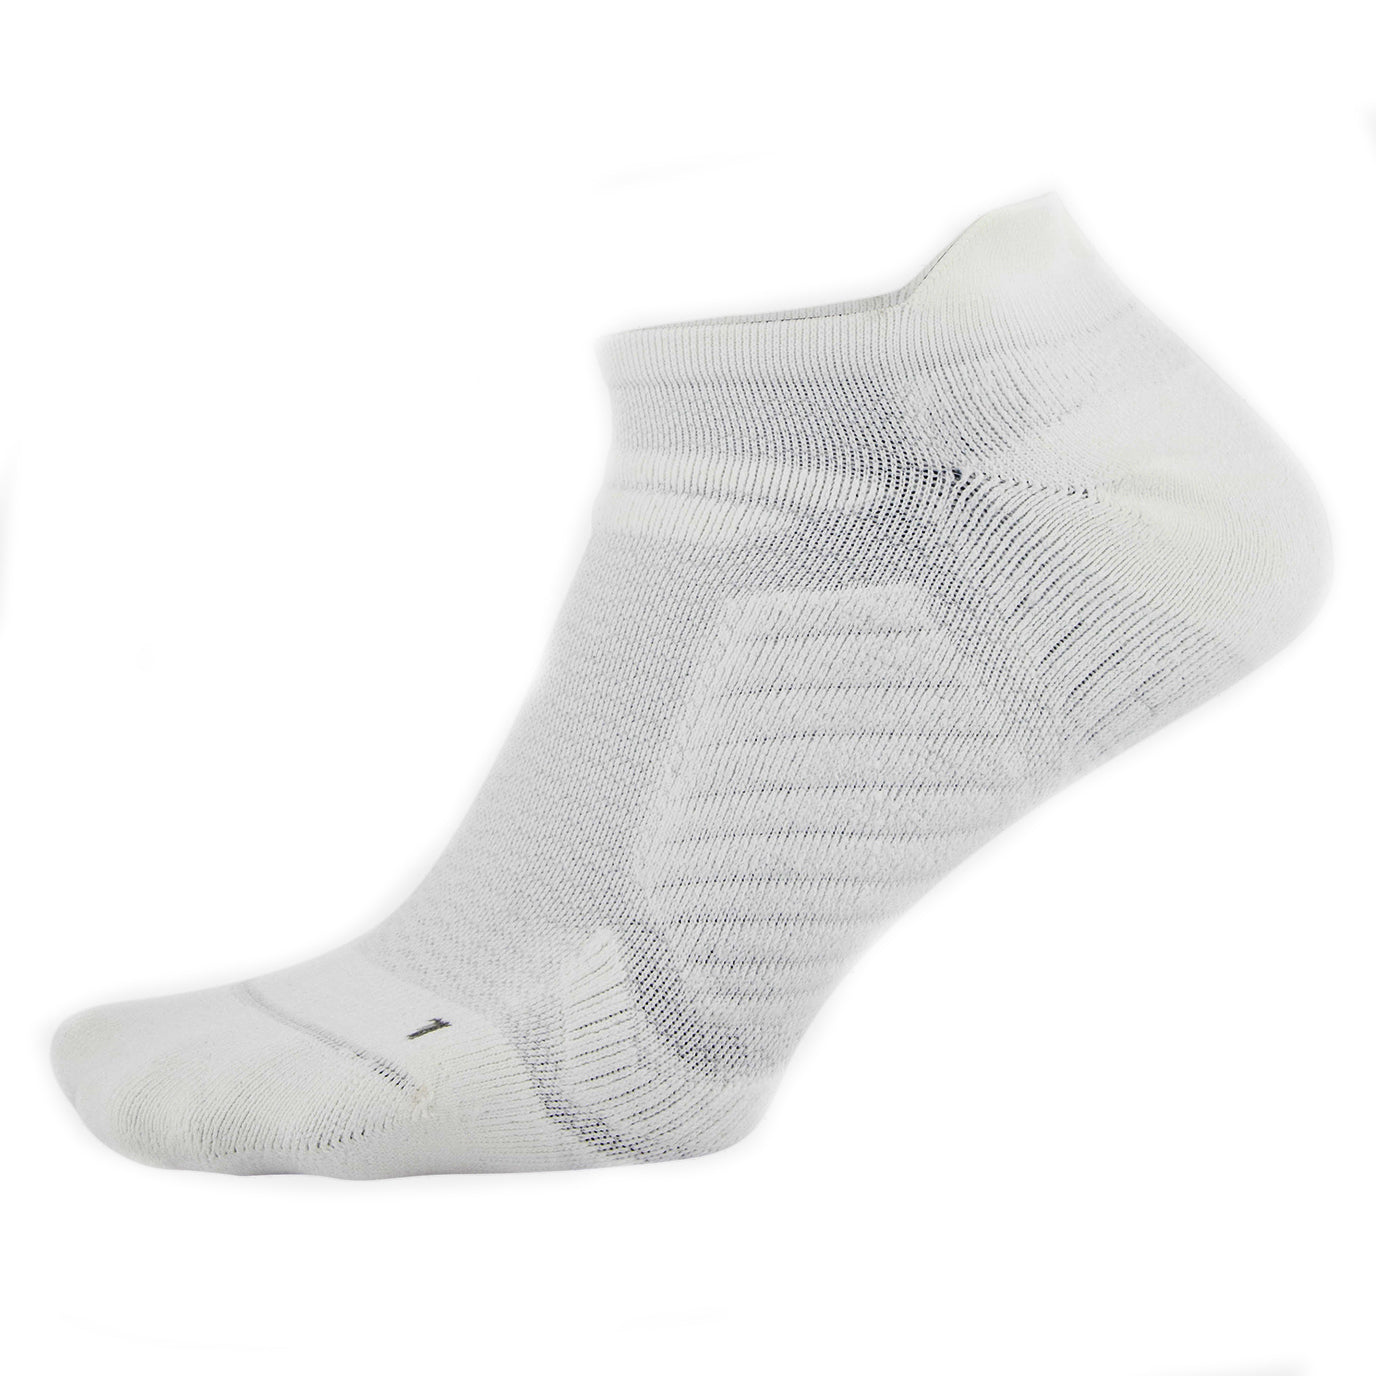 Under Armour Men's Cooling No Show Socks | White